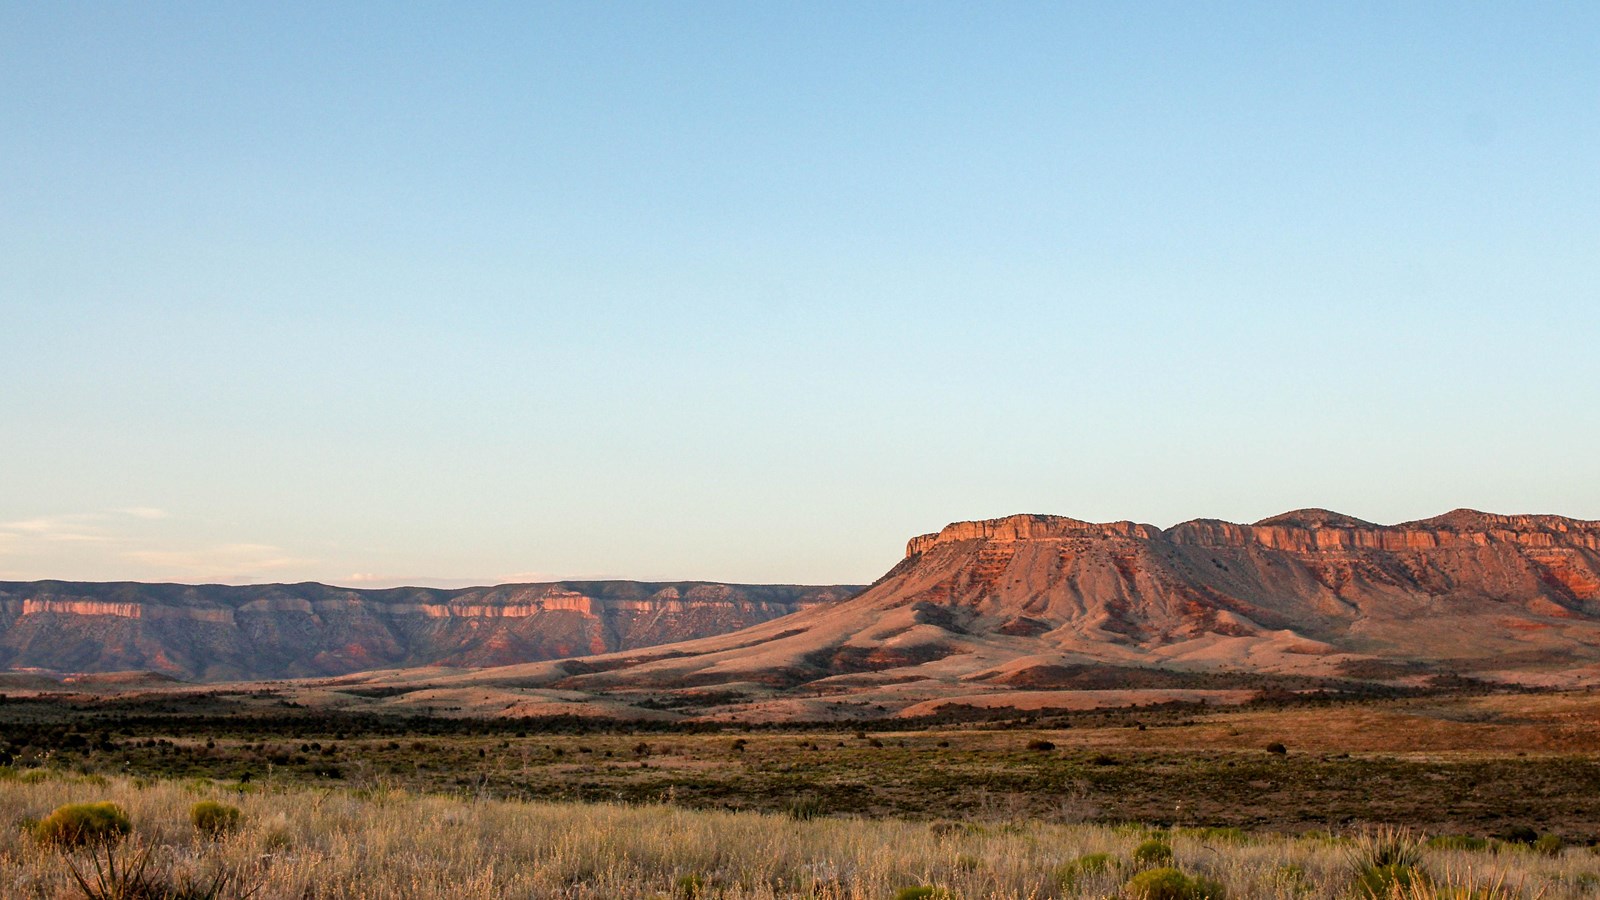 Band of cliffs bathed in an evening sunset glow, desert shrubs are seen in the foreground.